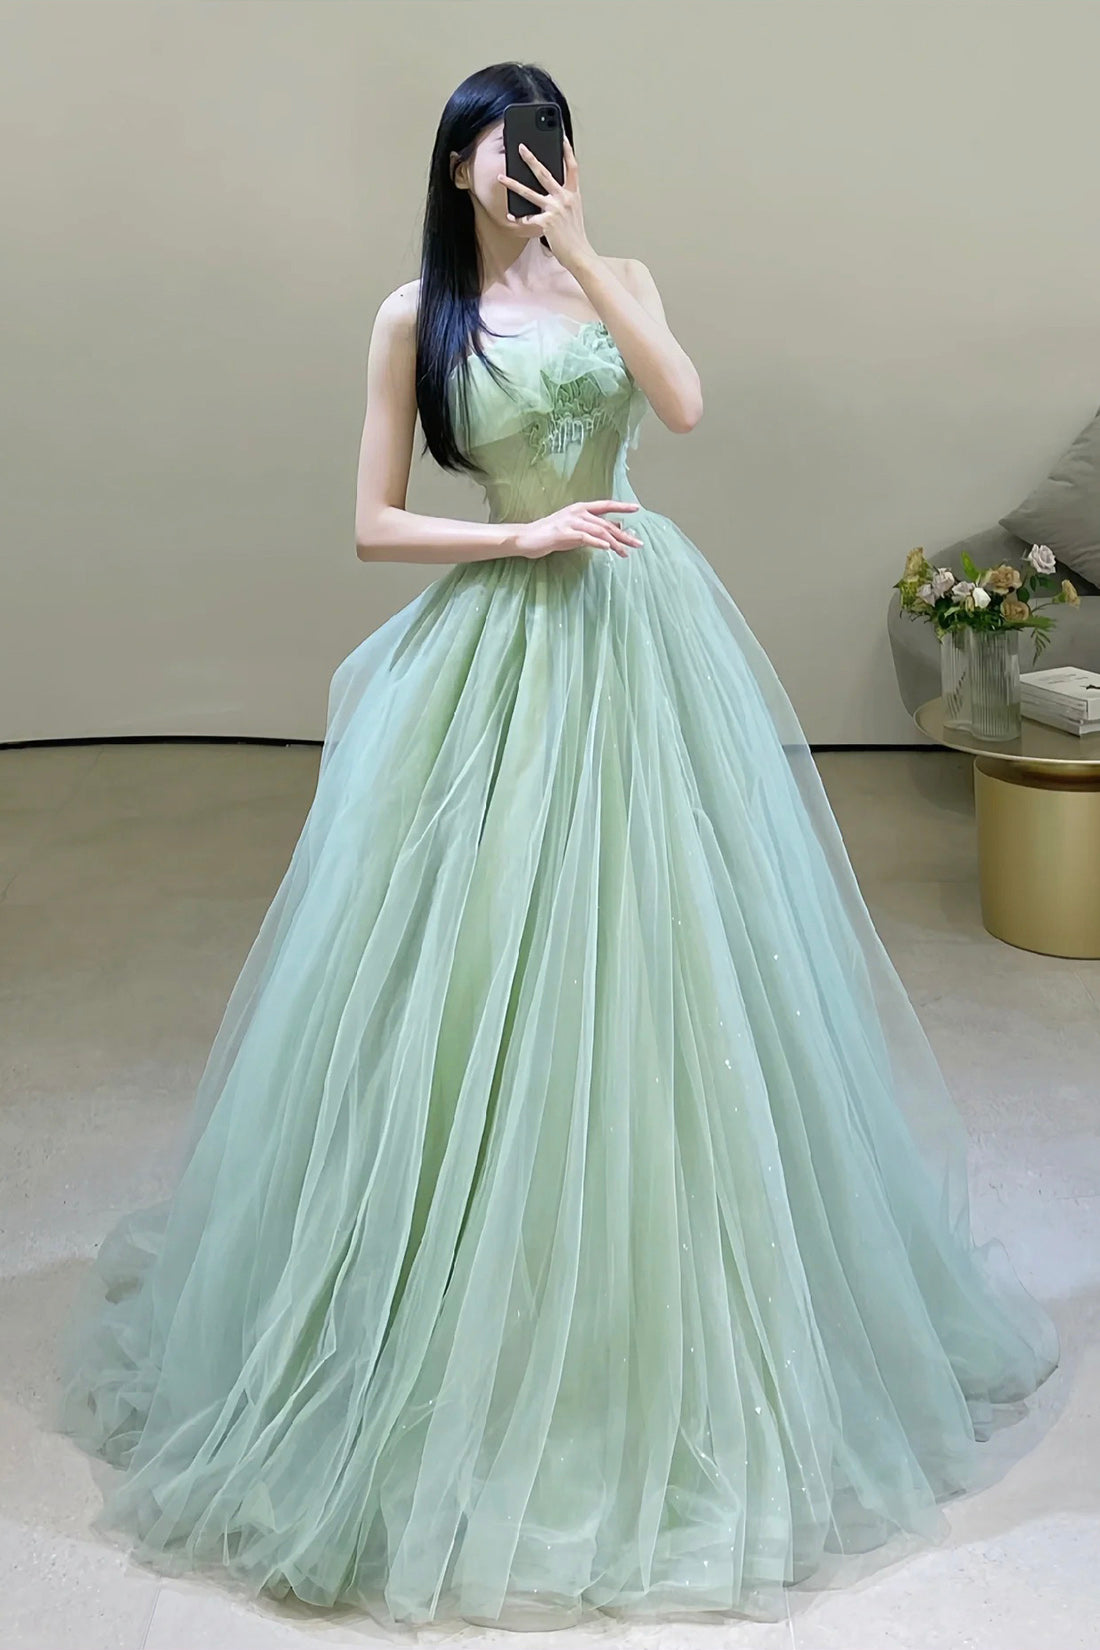 Green Strapless Tulle Long Prom Dress, Beautiful Green Evening Party Dress